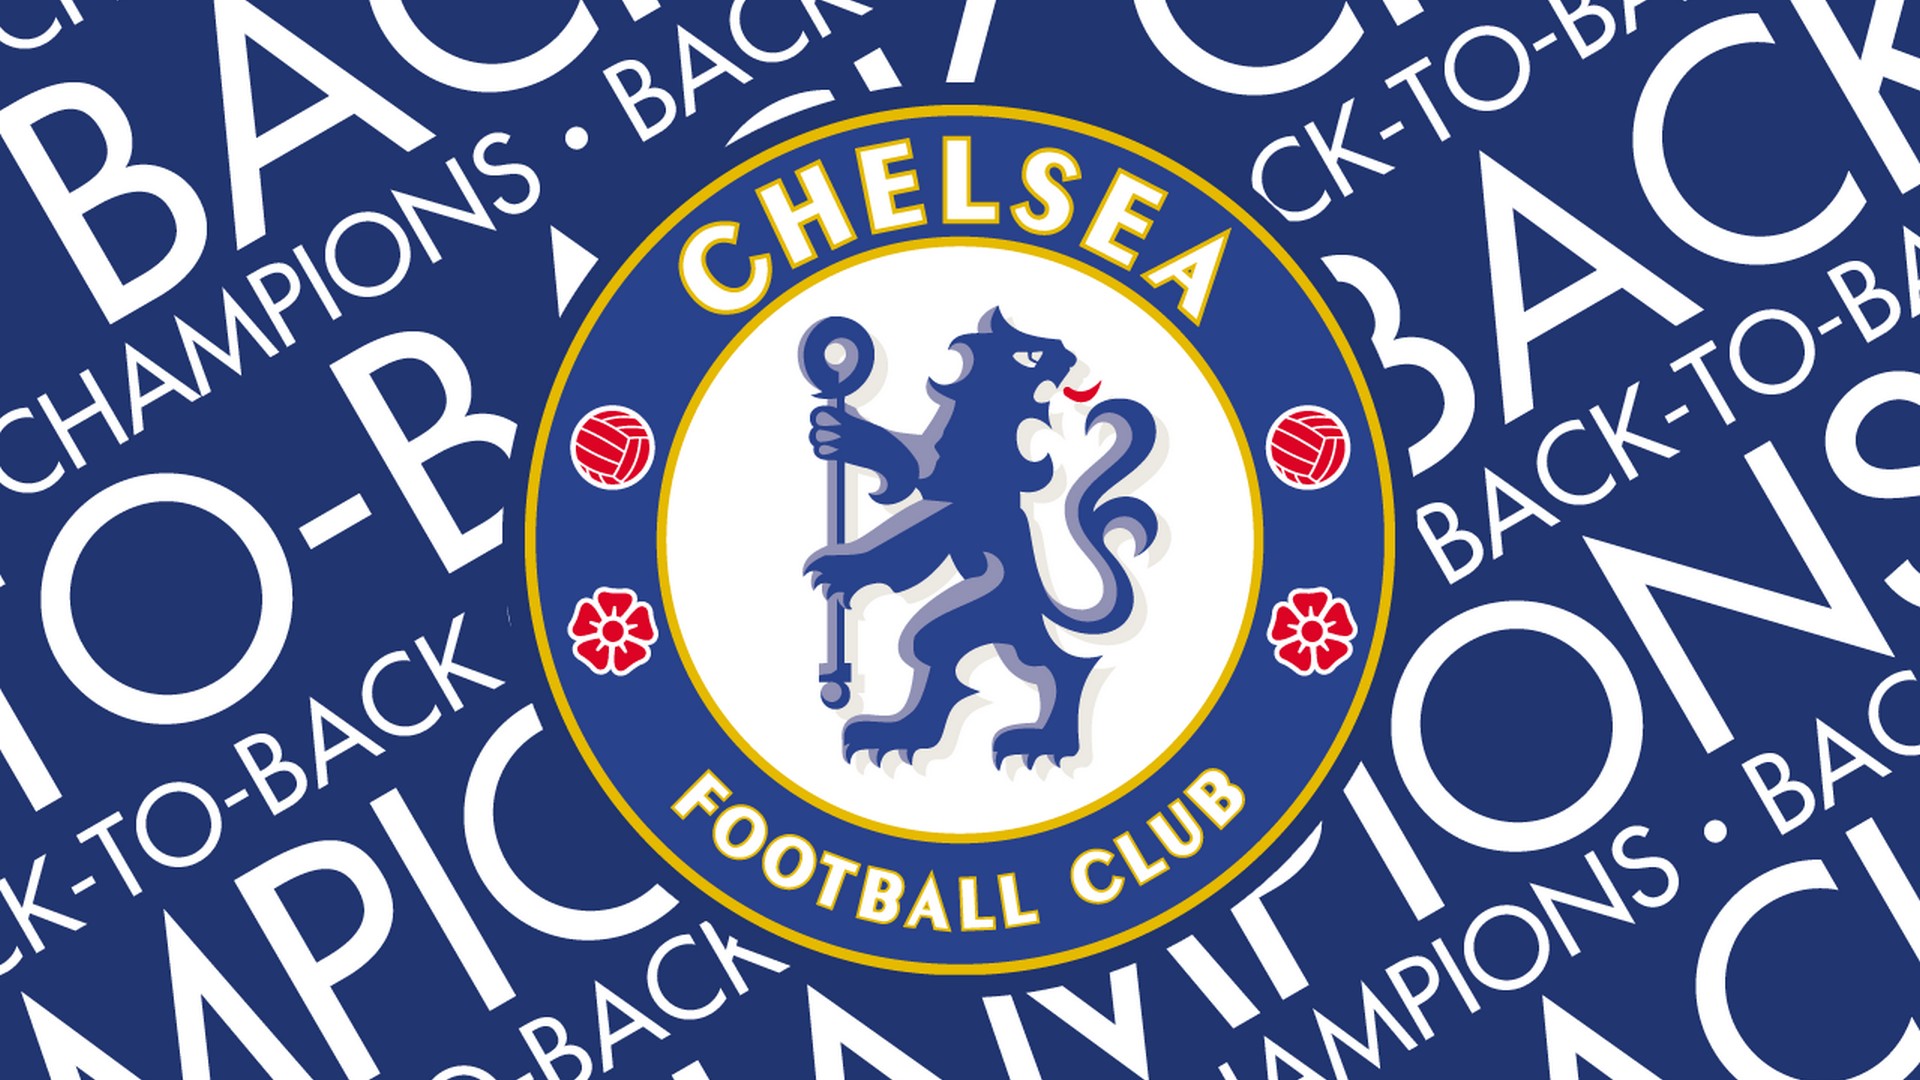 Chelsea Football Club Desktop Wallpapers With Resolution 1920X1080 pixel. You can make this wallpaper for your Mac or Windows Desktop Background, iPhone, Android or Tablet and another Smartphone device for free